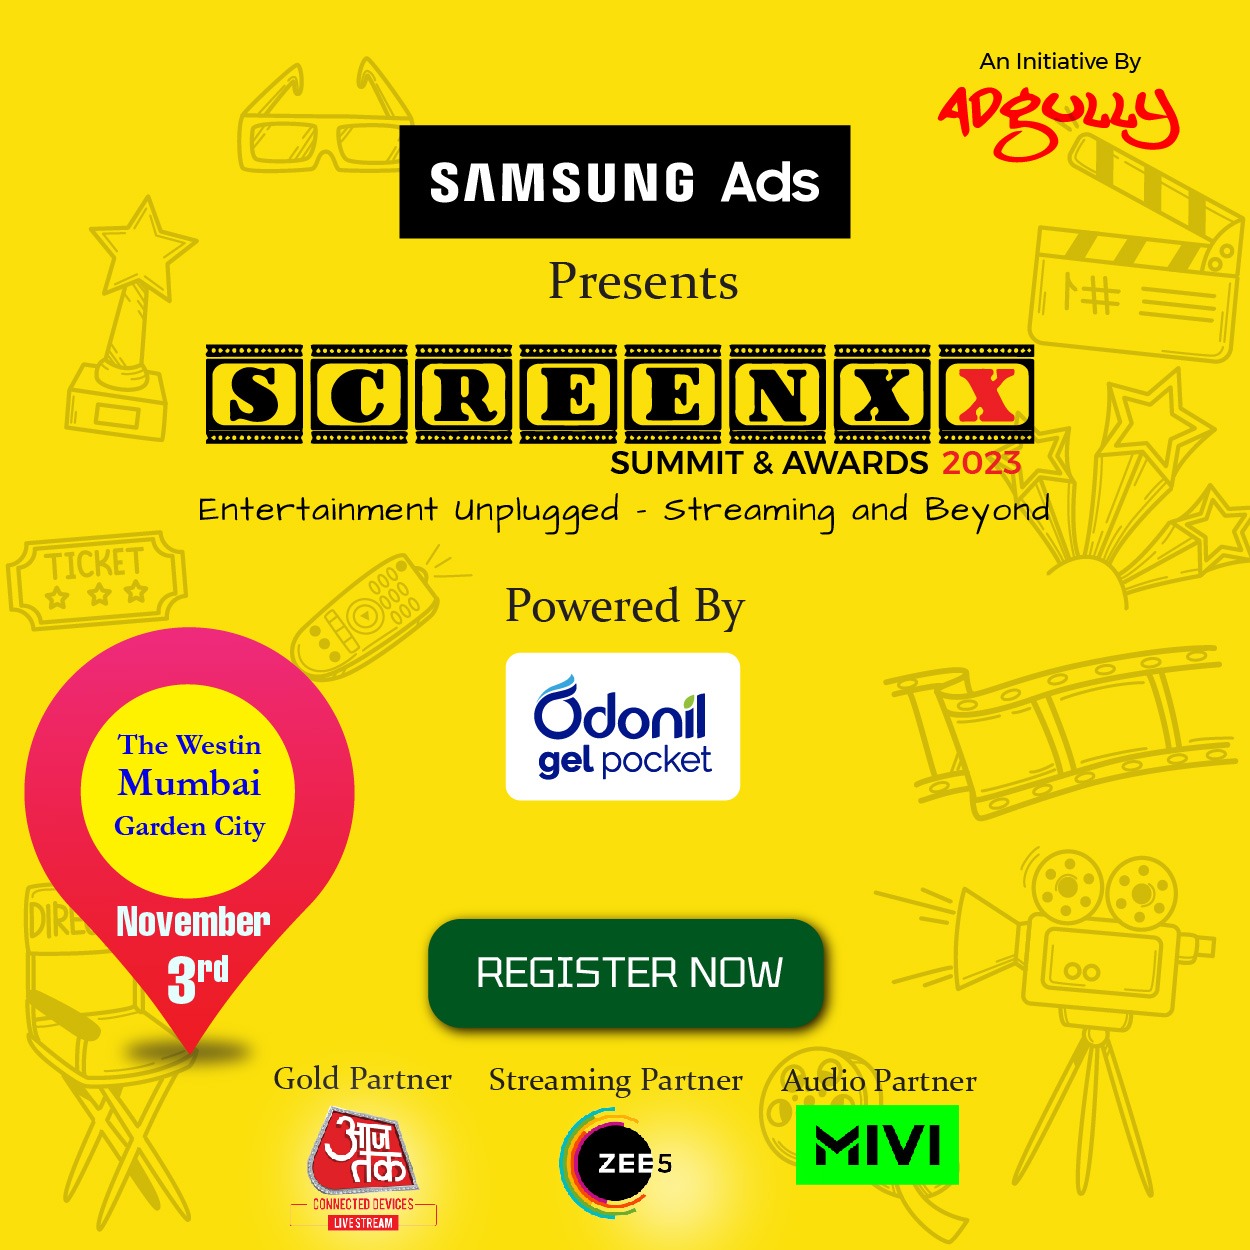 Lights, camera, acknowledgment: Adgully announces SCREENXX Summit and Awards 2023